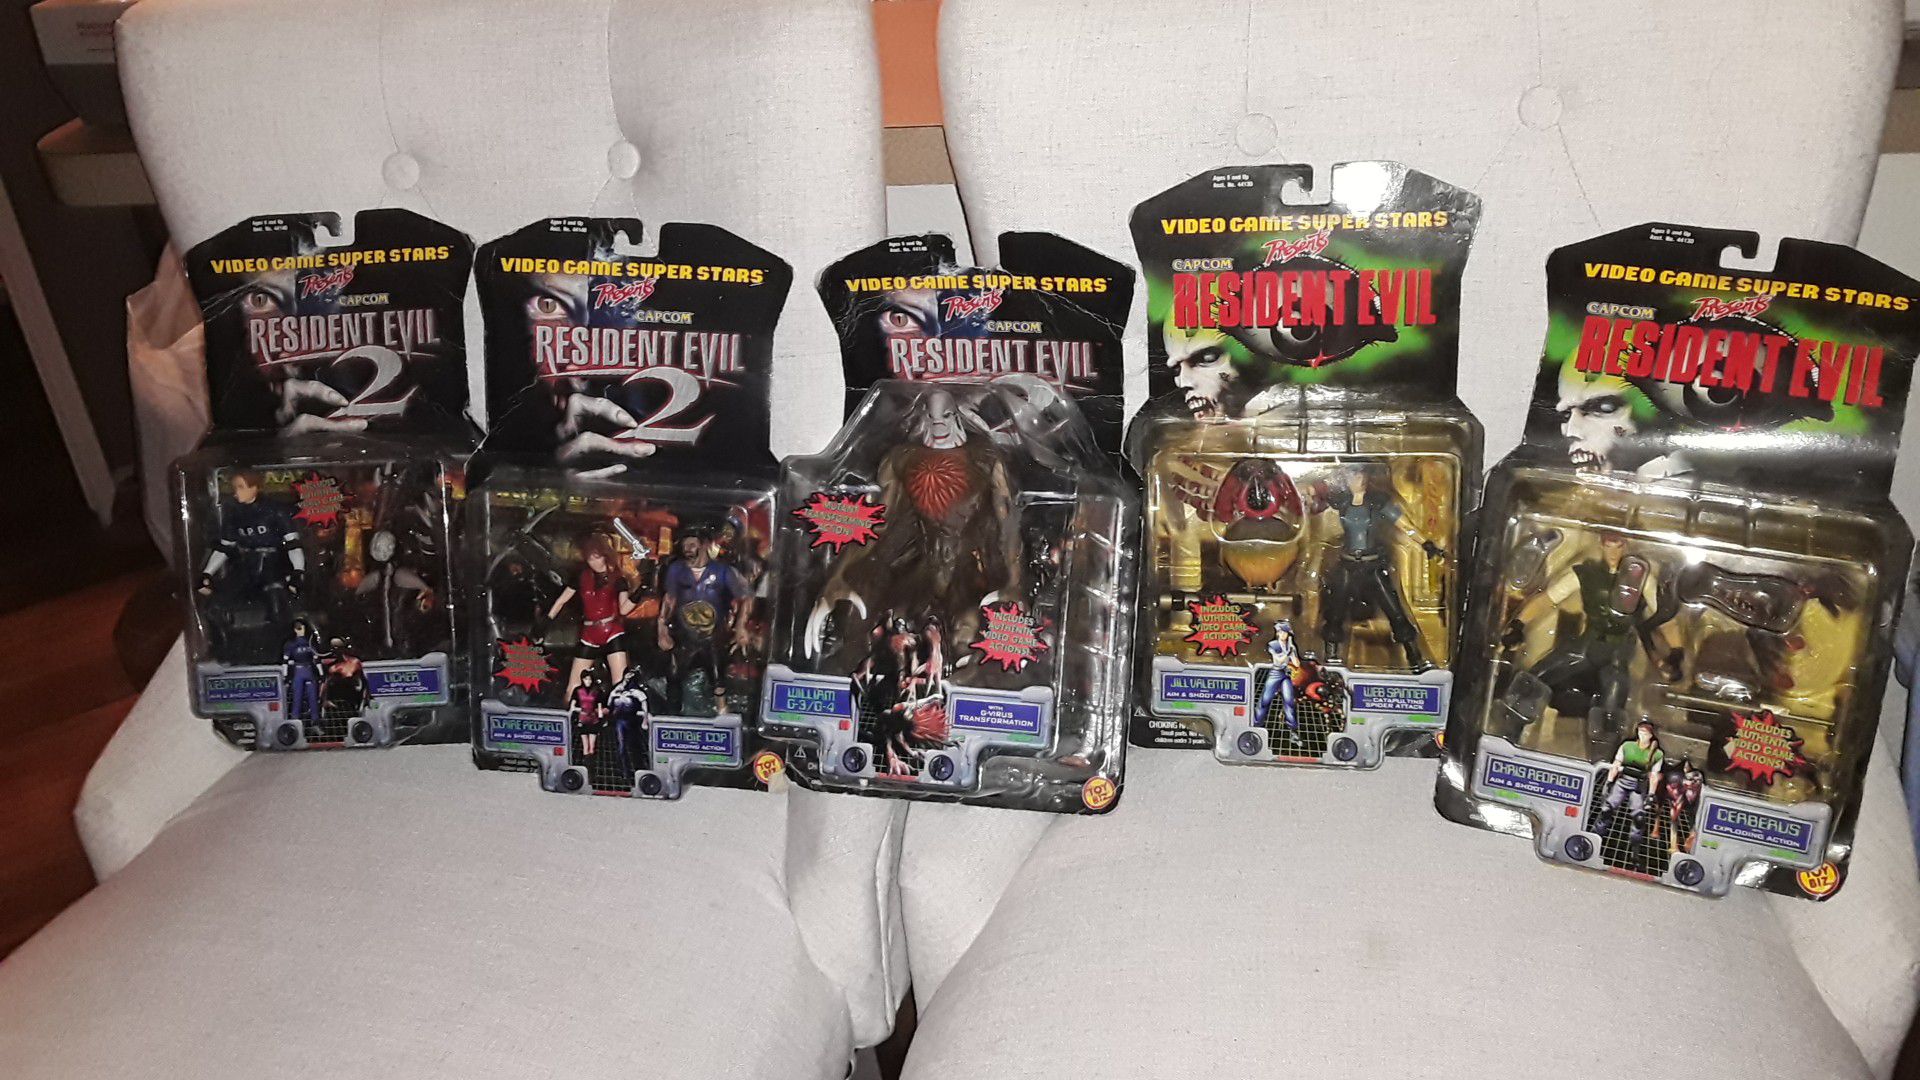 Resident evil action figures collections